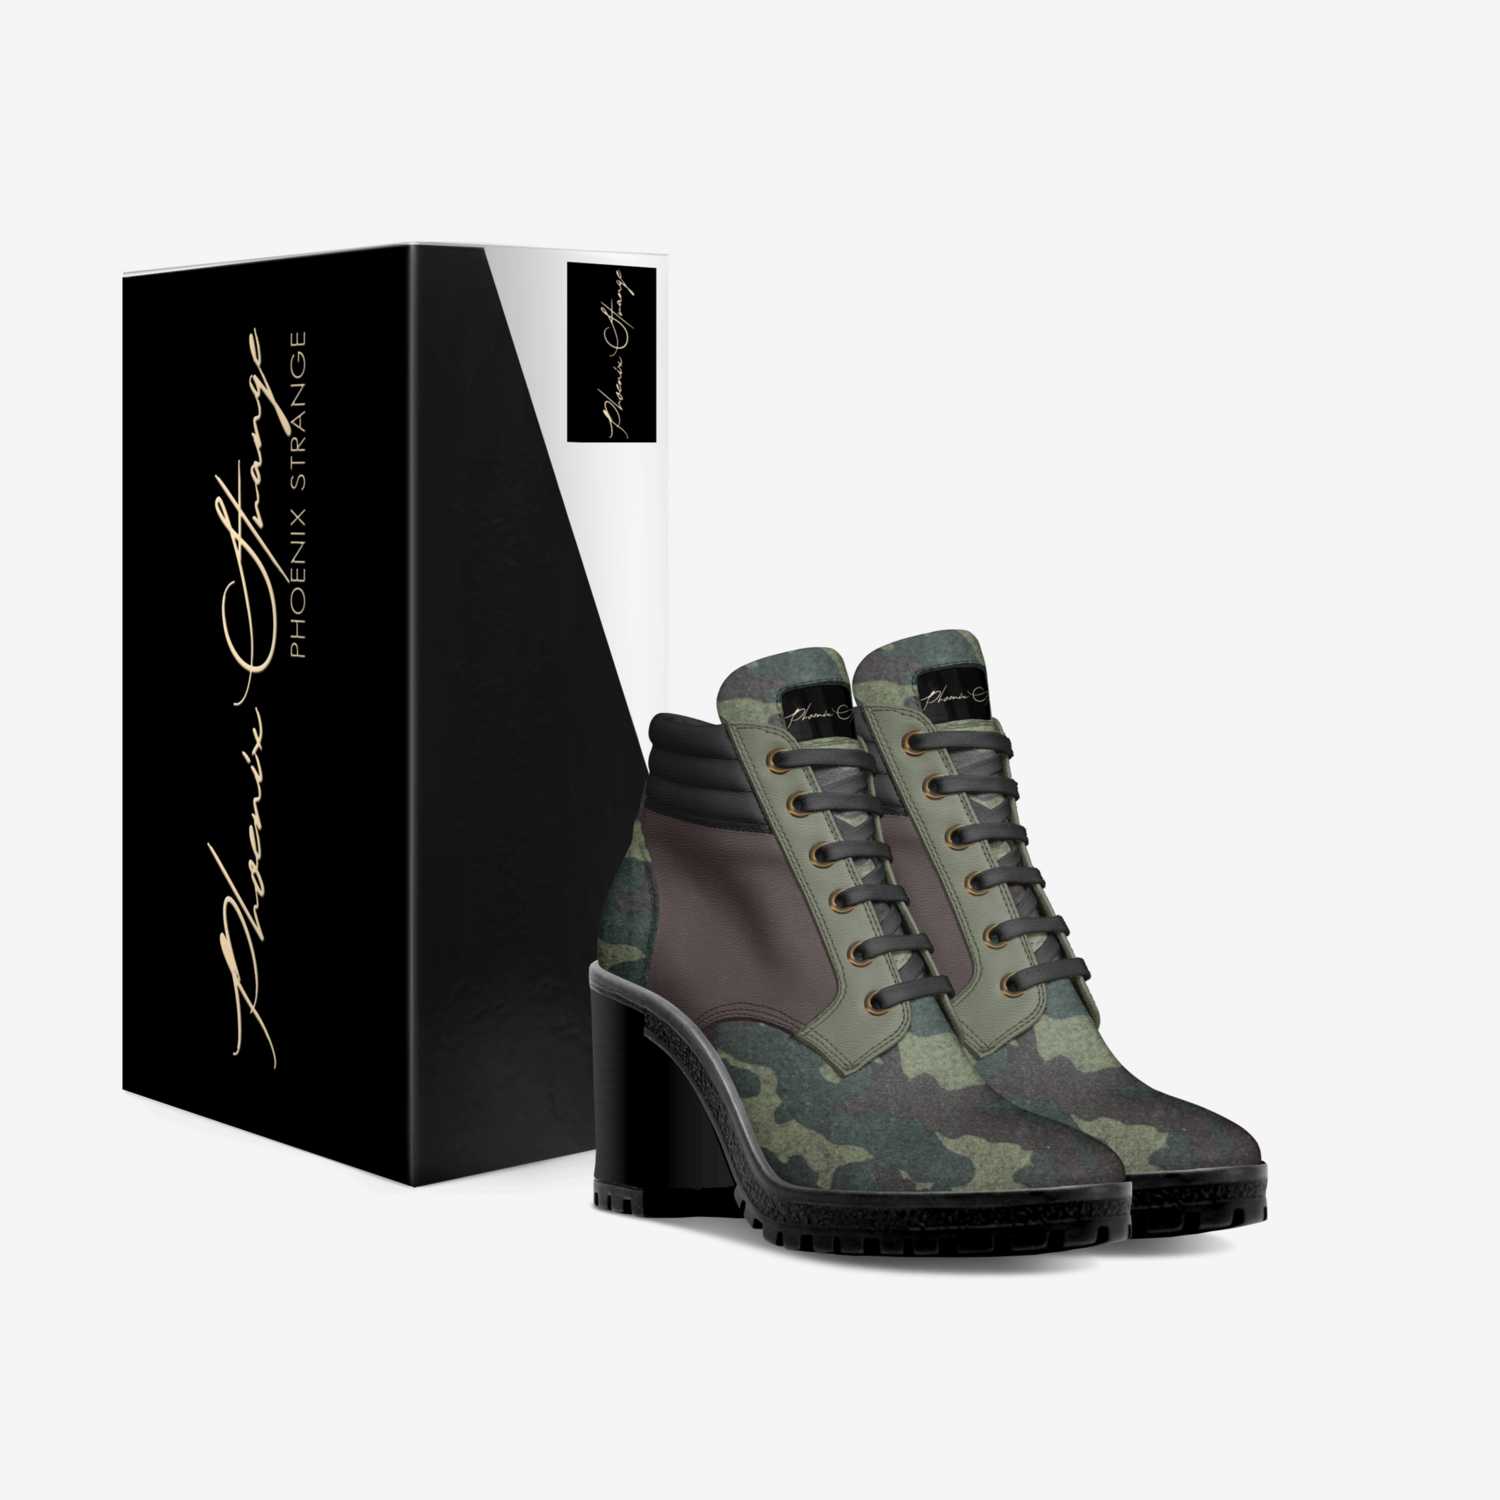 Luna Marie custom made in Italy shoes by Phoenix Strange | Box view